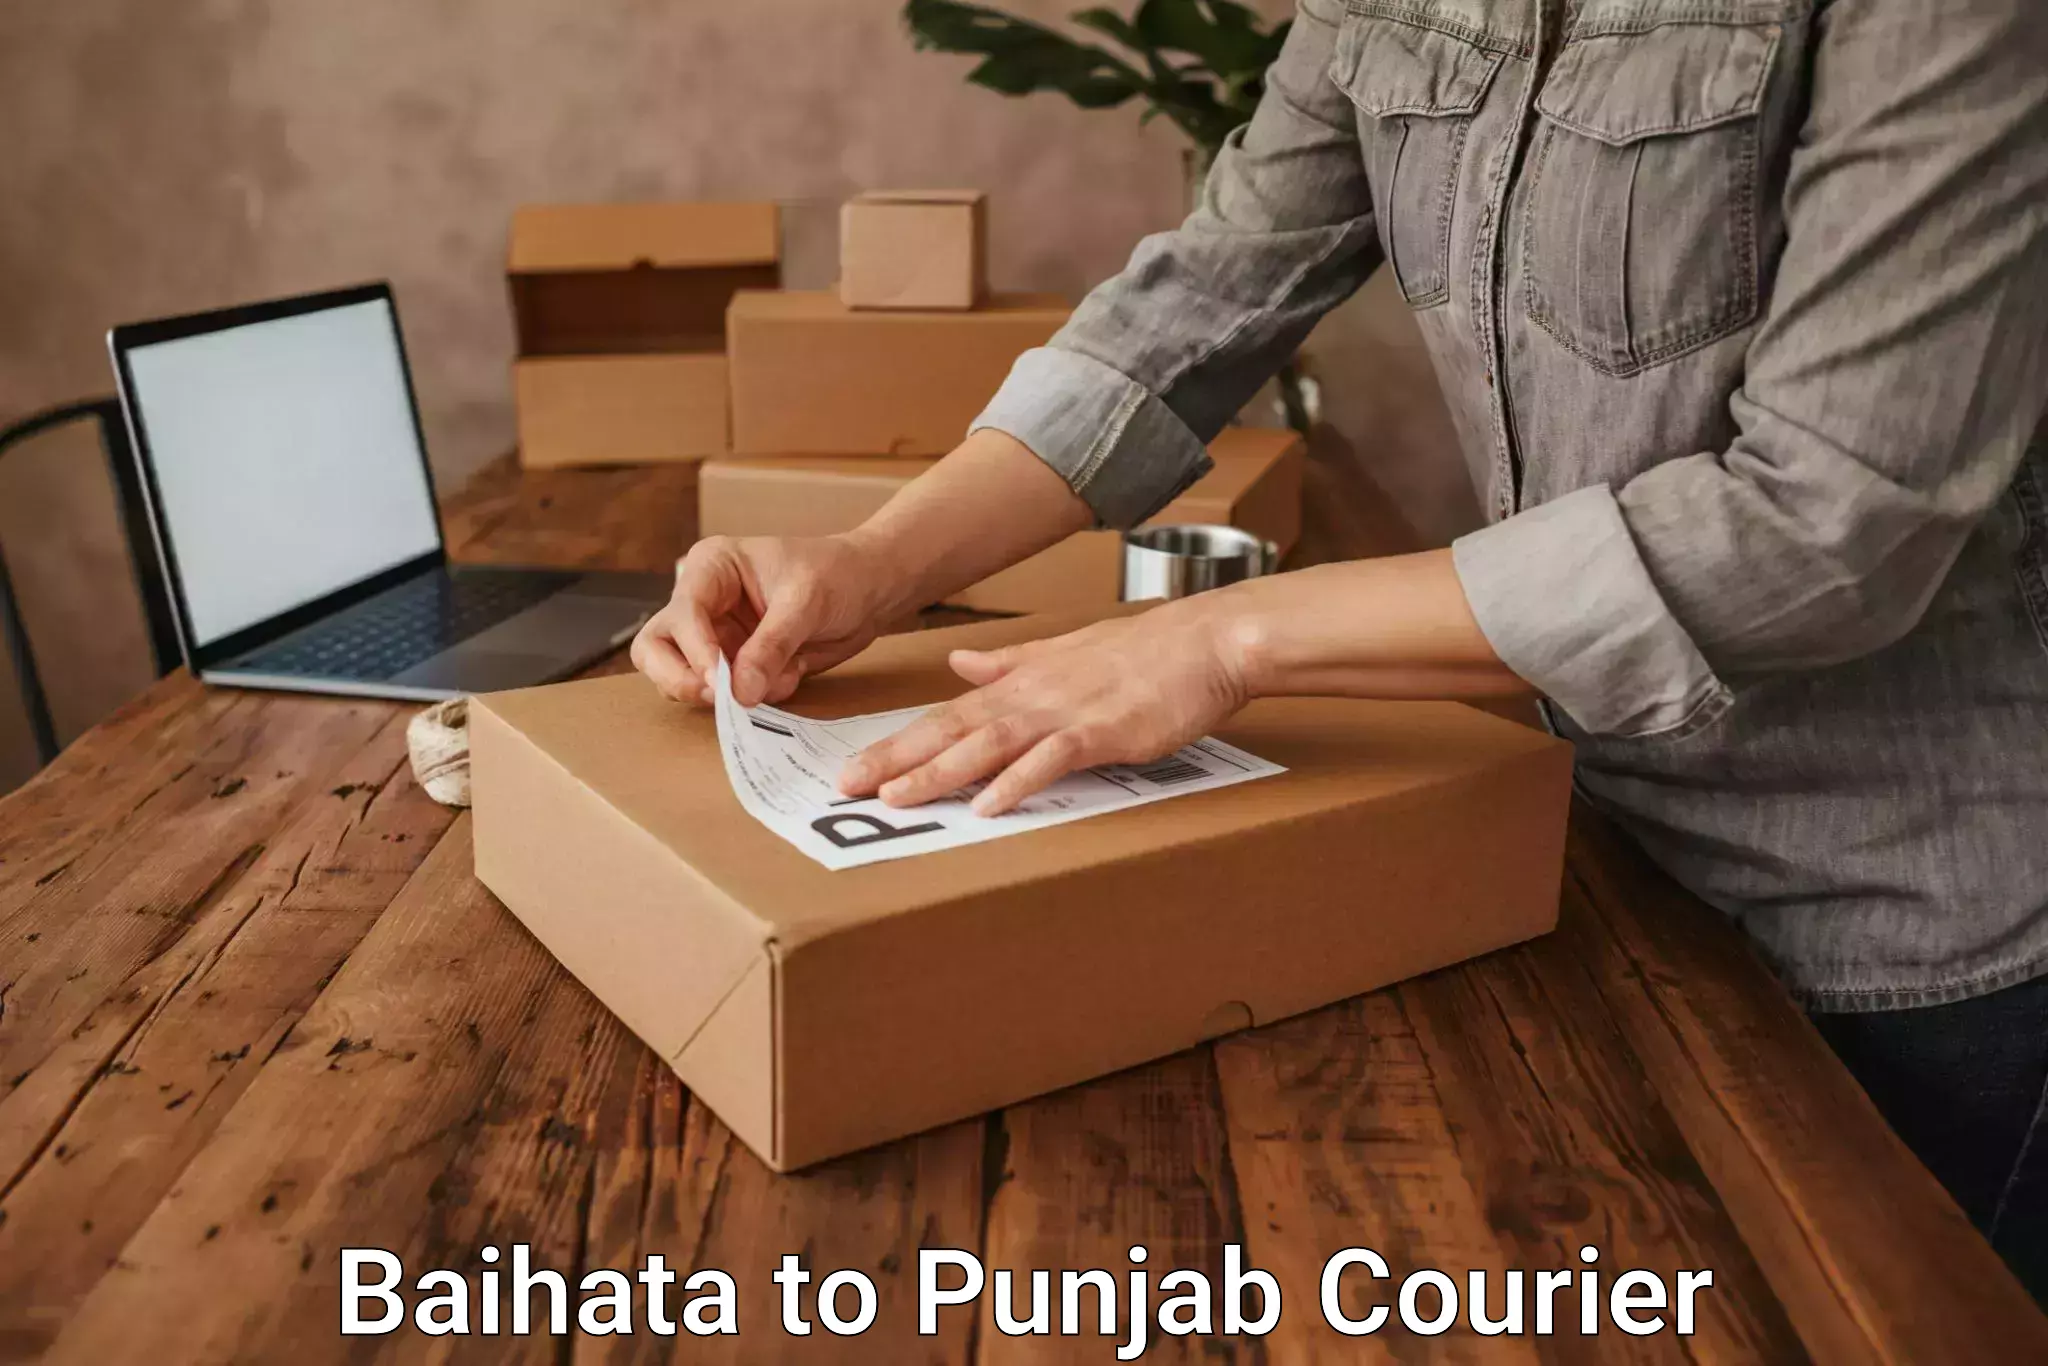 Cash on delivery service Baihata to Punjab